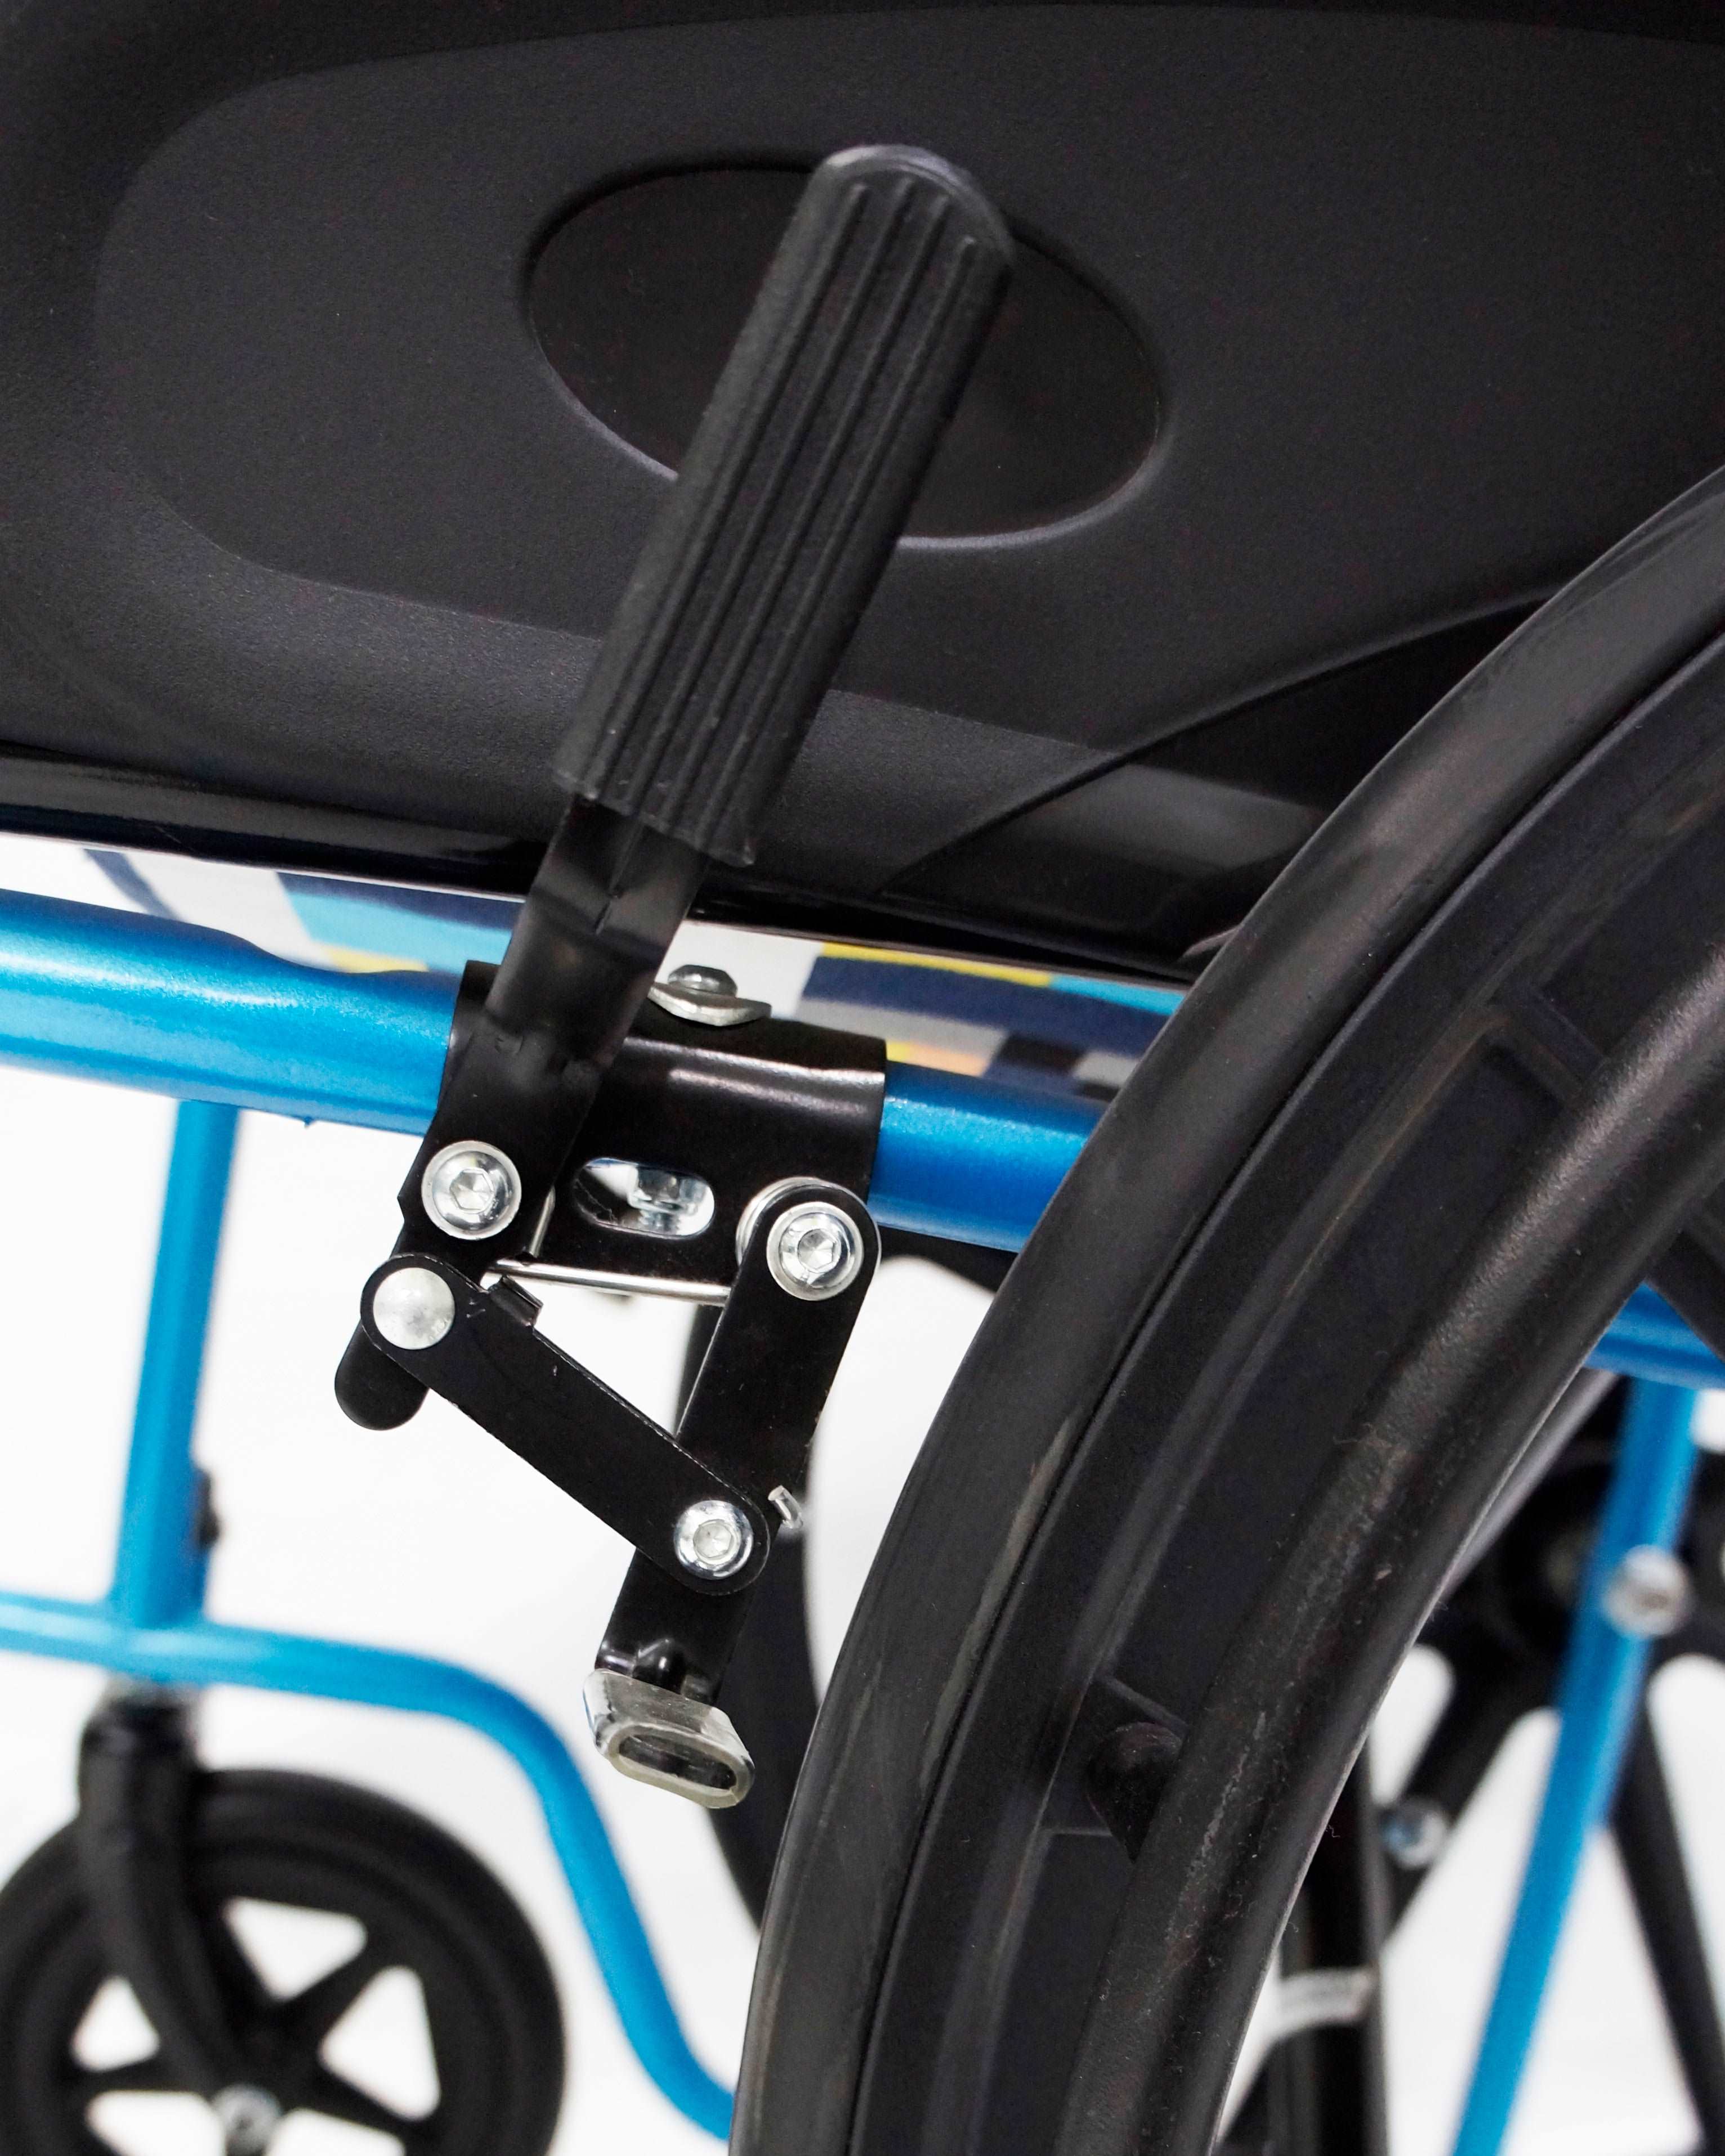 Kids Wheelchair - Pediatric Mobility Aid for Special Children